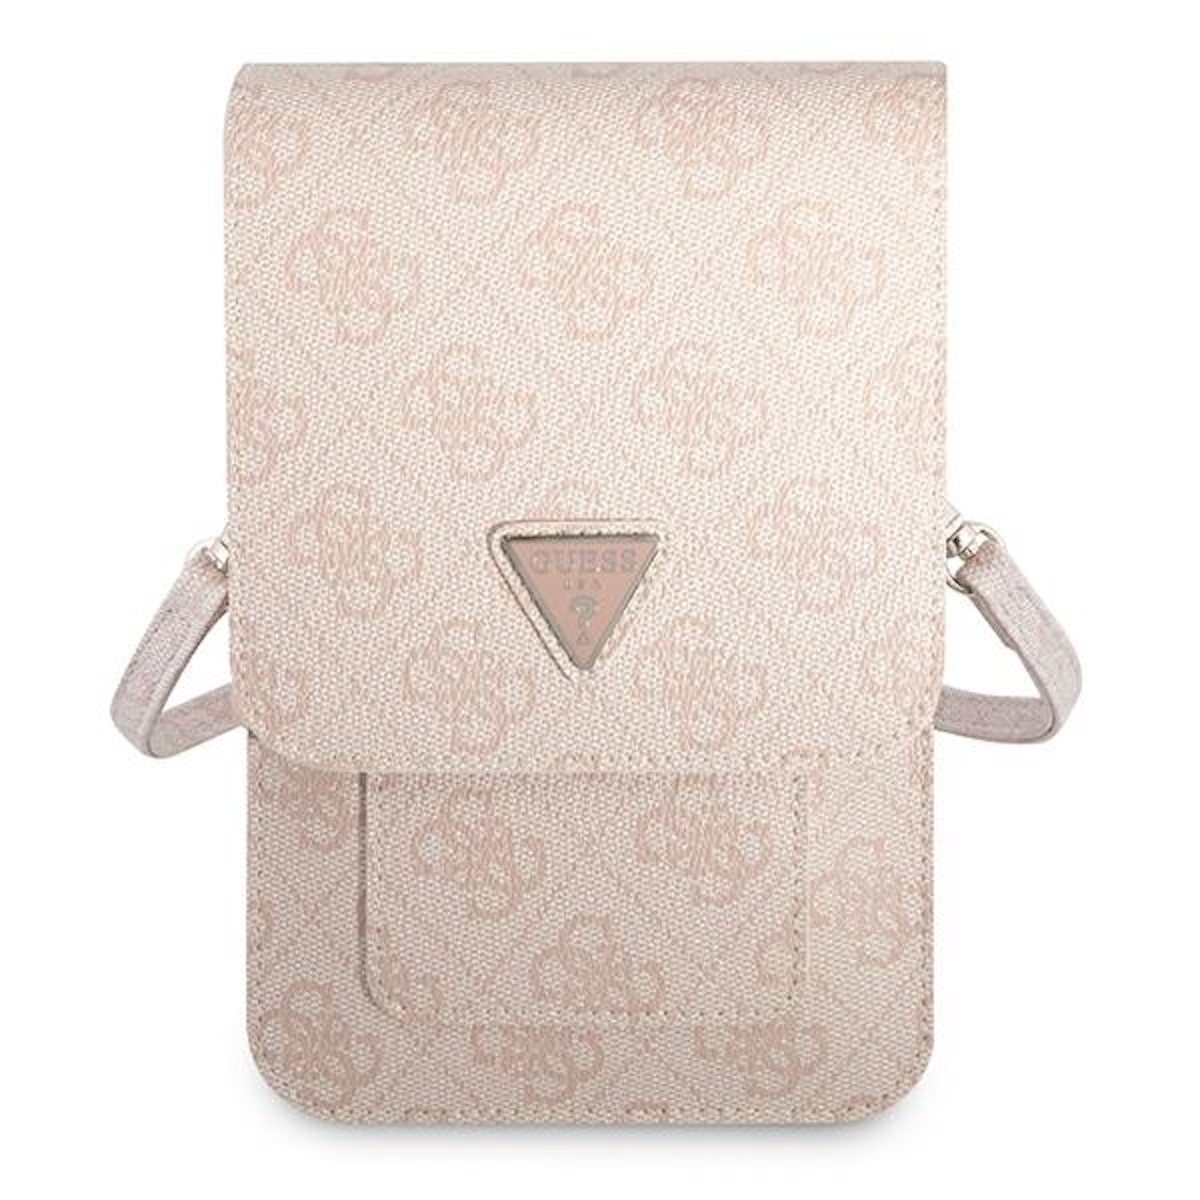 GUESS Torebka Triangle Universell, Umhängetasche, Full Rosa Cover, Universelle Tasche